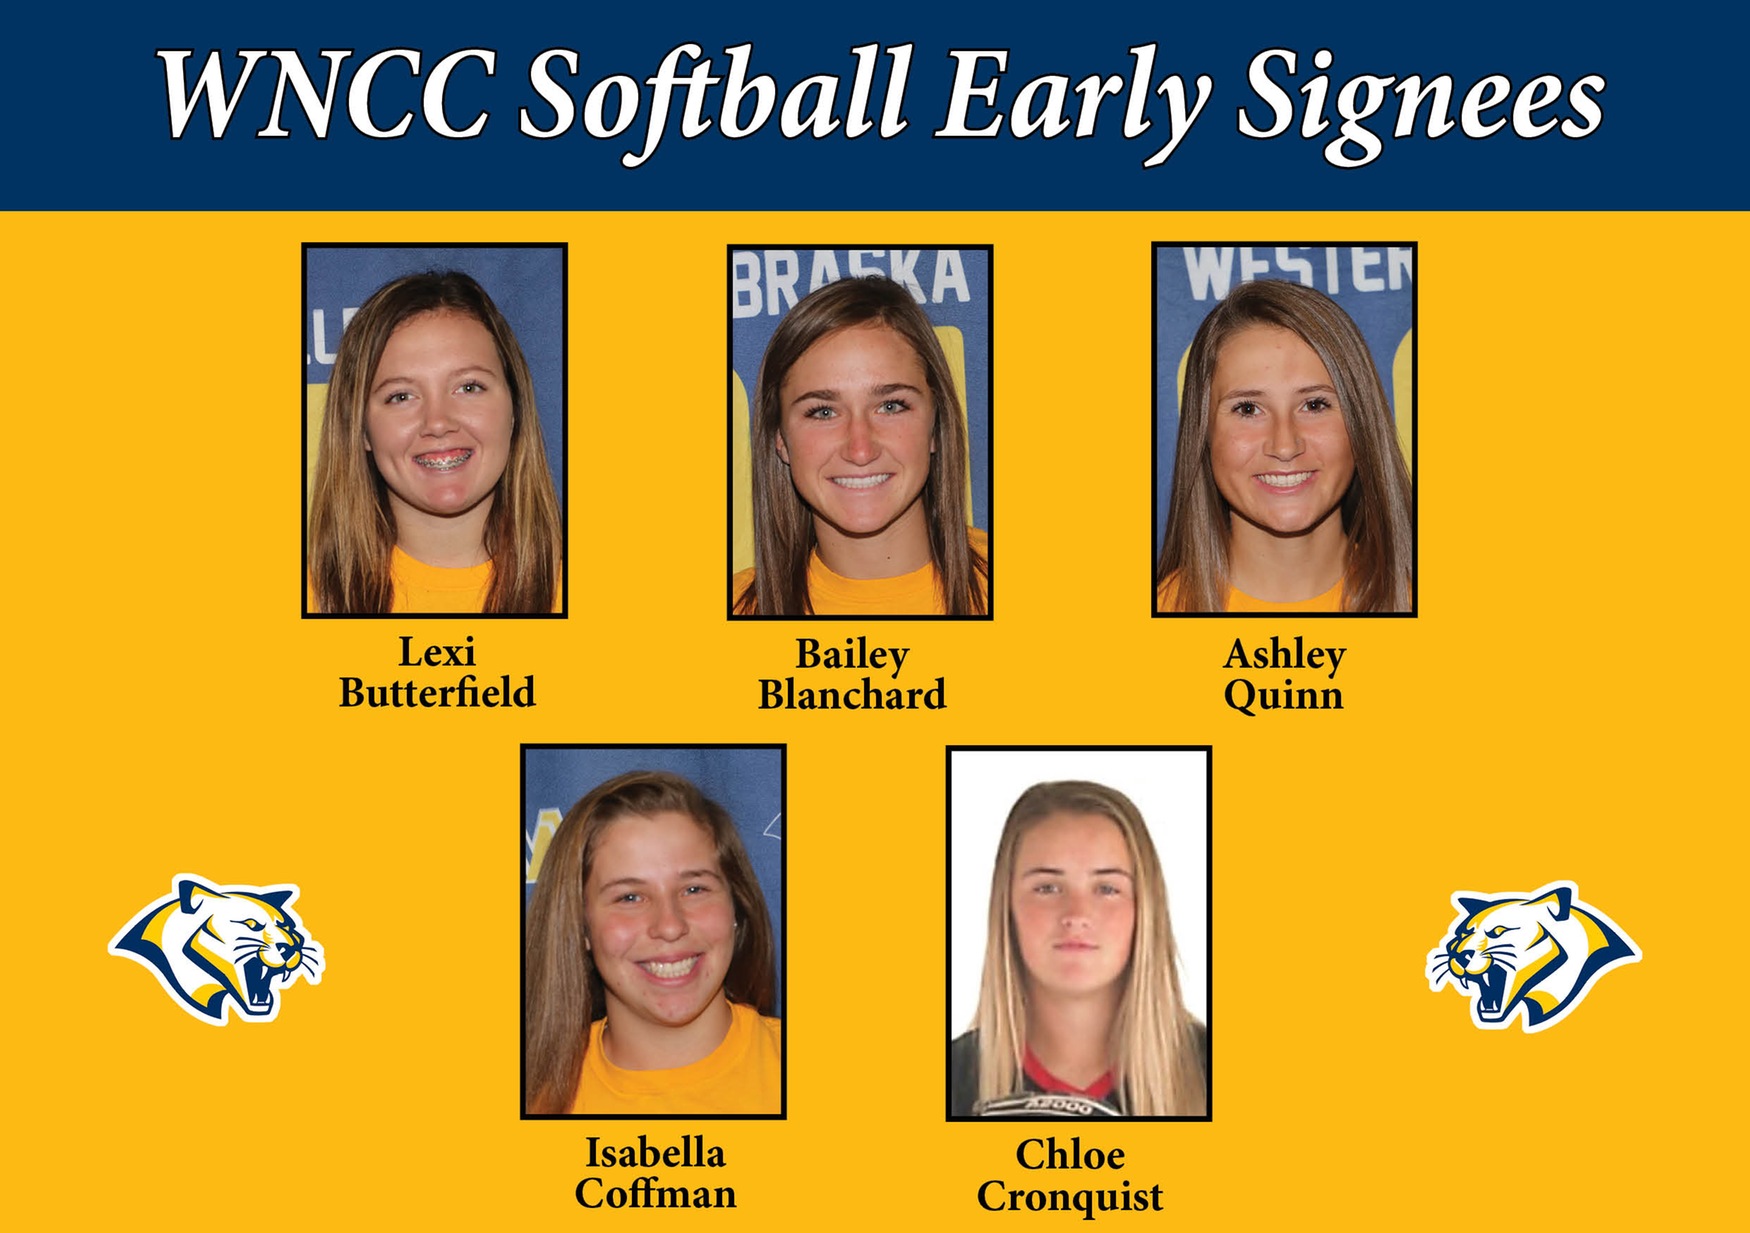 WNCC softball signs five during early signing period